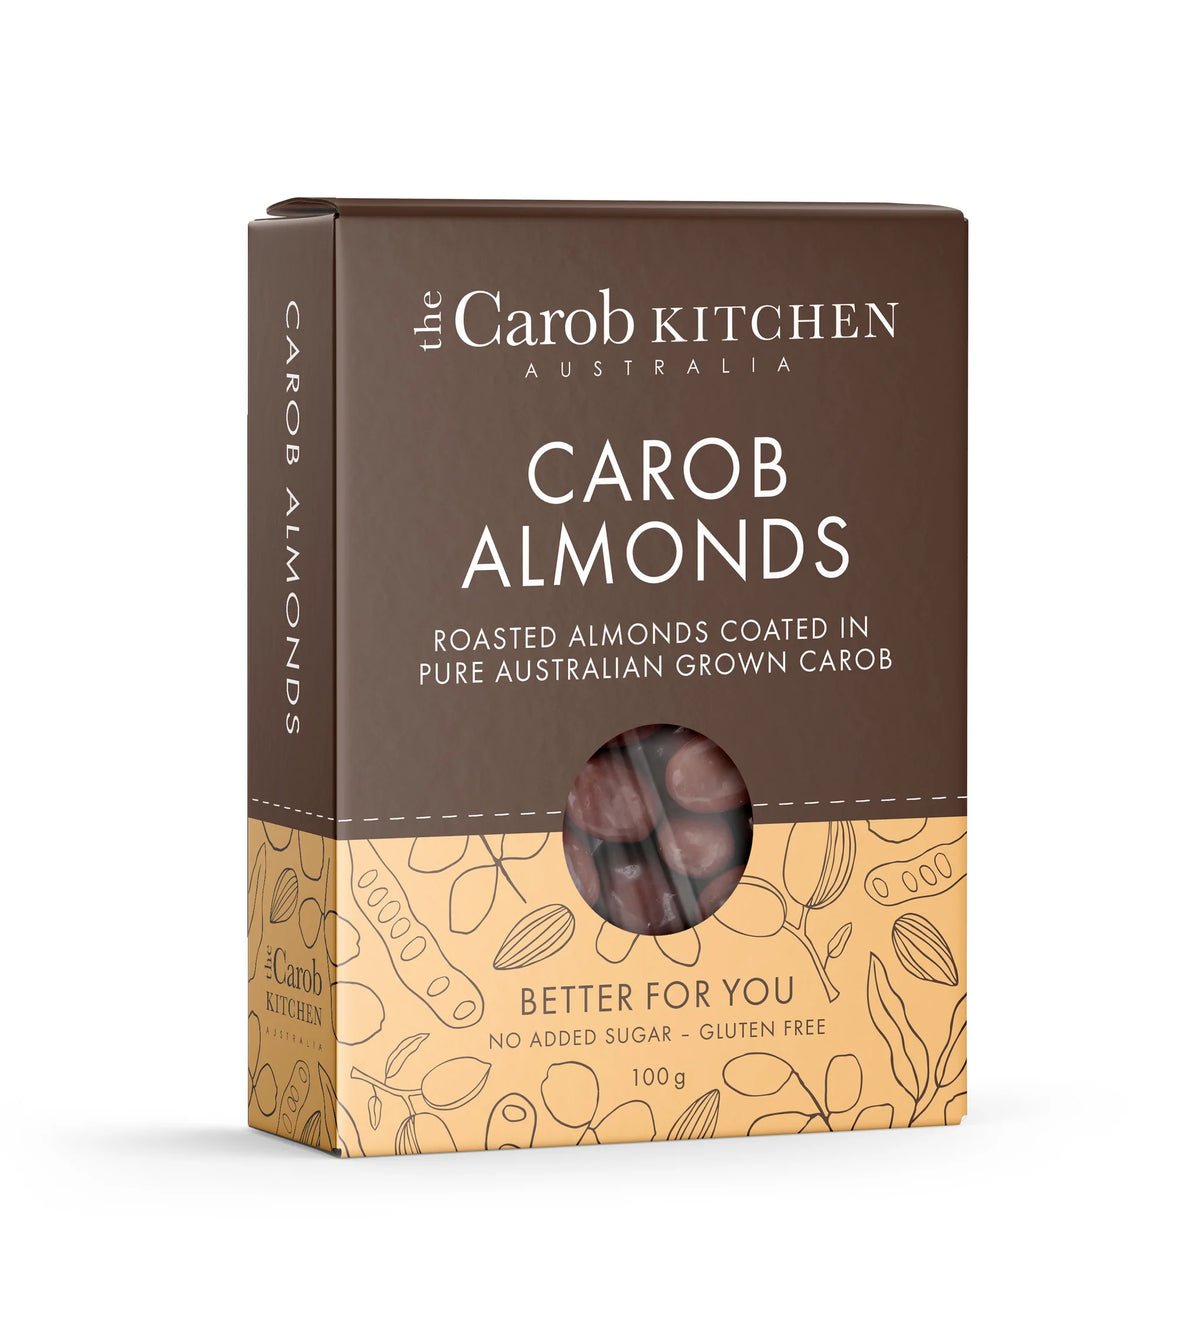 The Carob Kitchen Coated Almonds